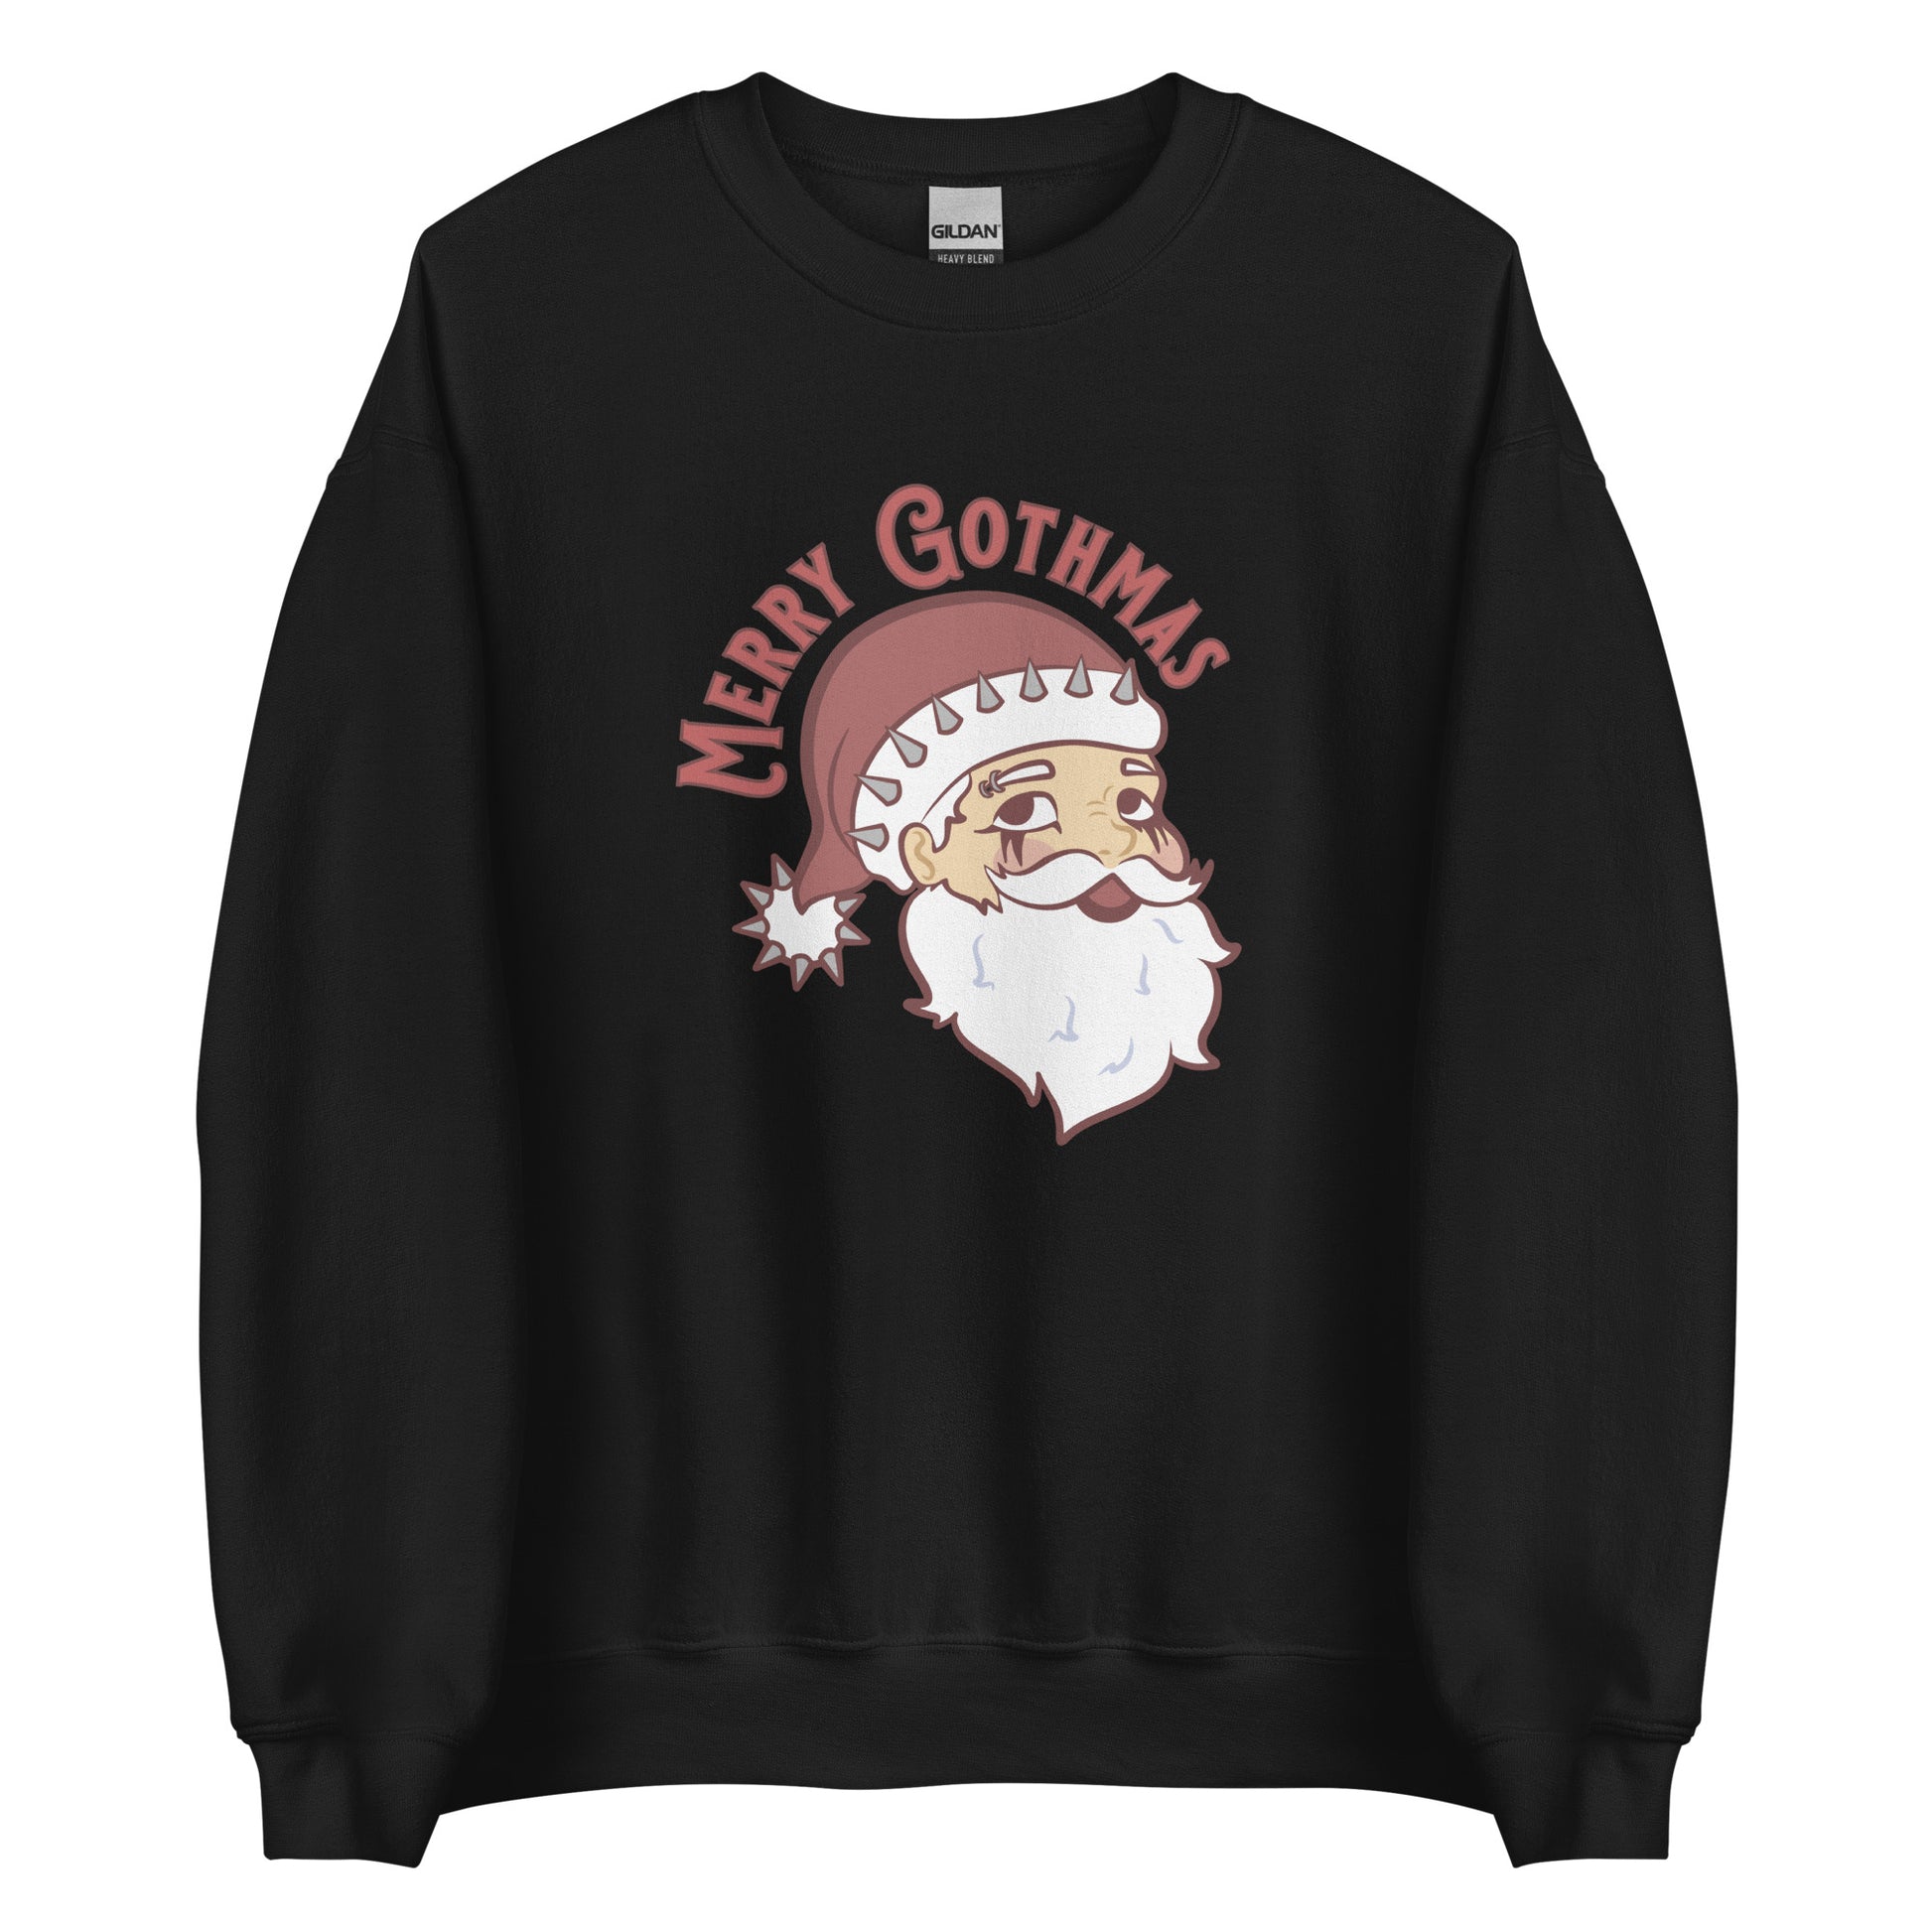 A black crewneck sweatshirt featuring an image of Santa Claus. He is wearing goth-style makeup and his hat is decorated with spikes. Text above Santa reads "Merry Gothmas"